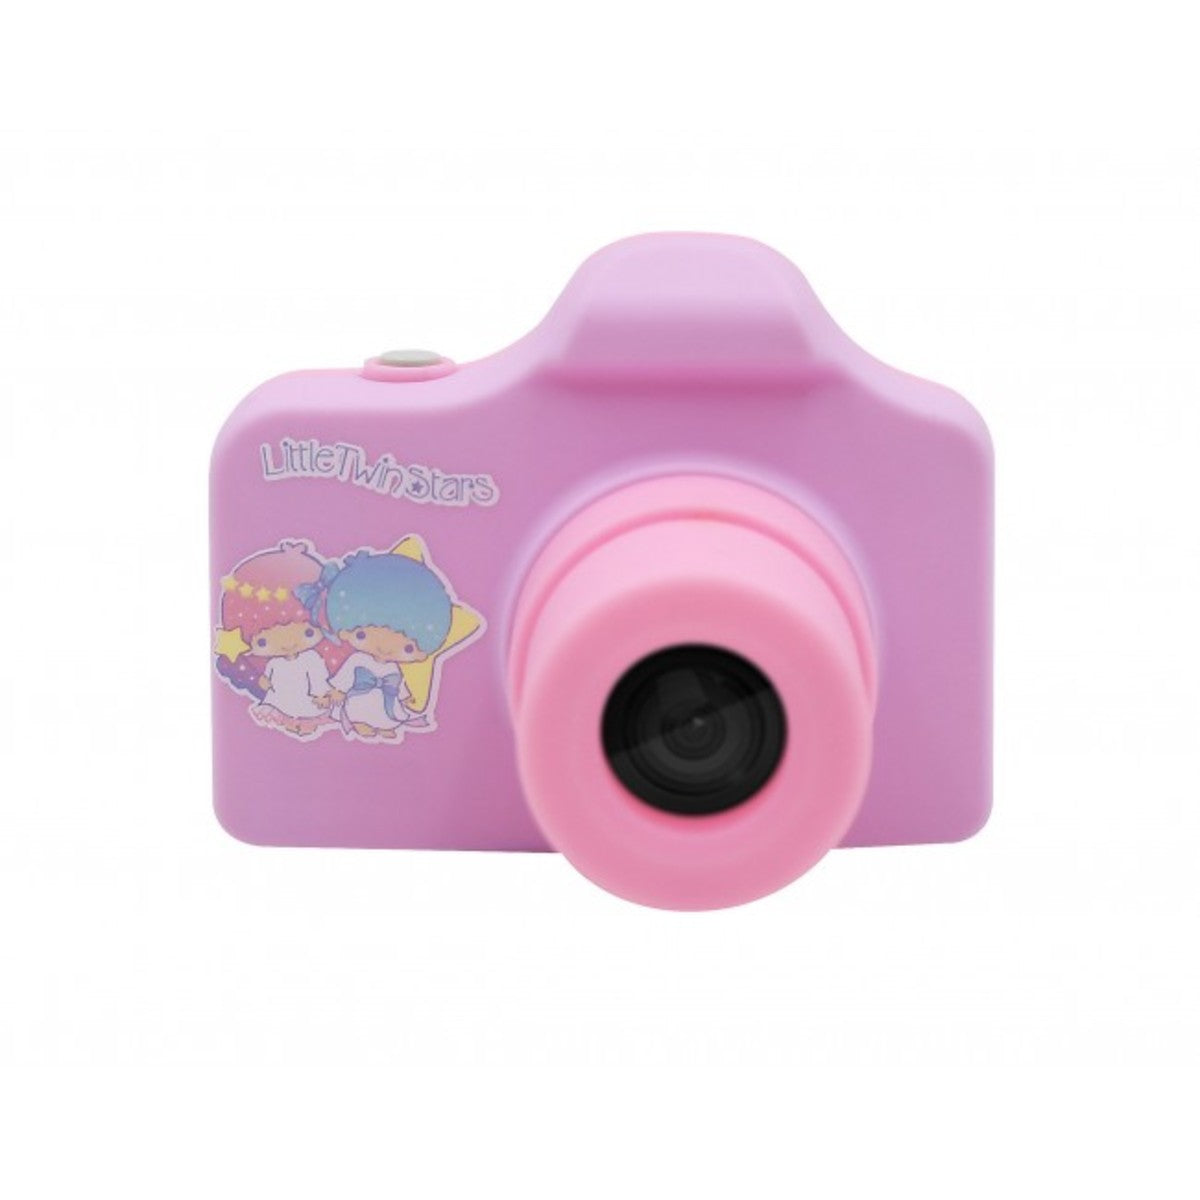 SANRIO - Children's photography camera - Little Twin Stars [Hong Kong licensed product]